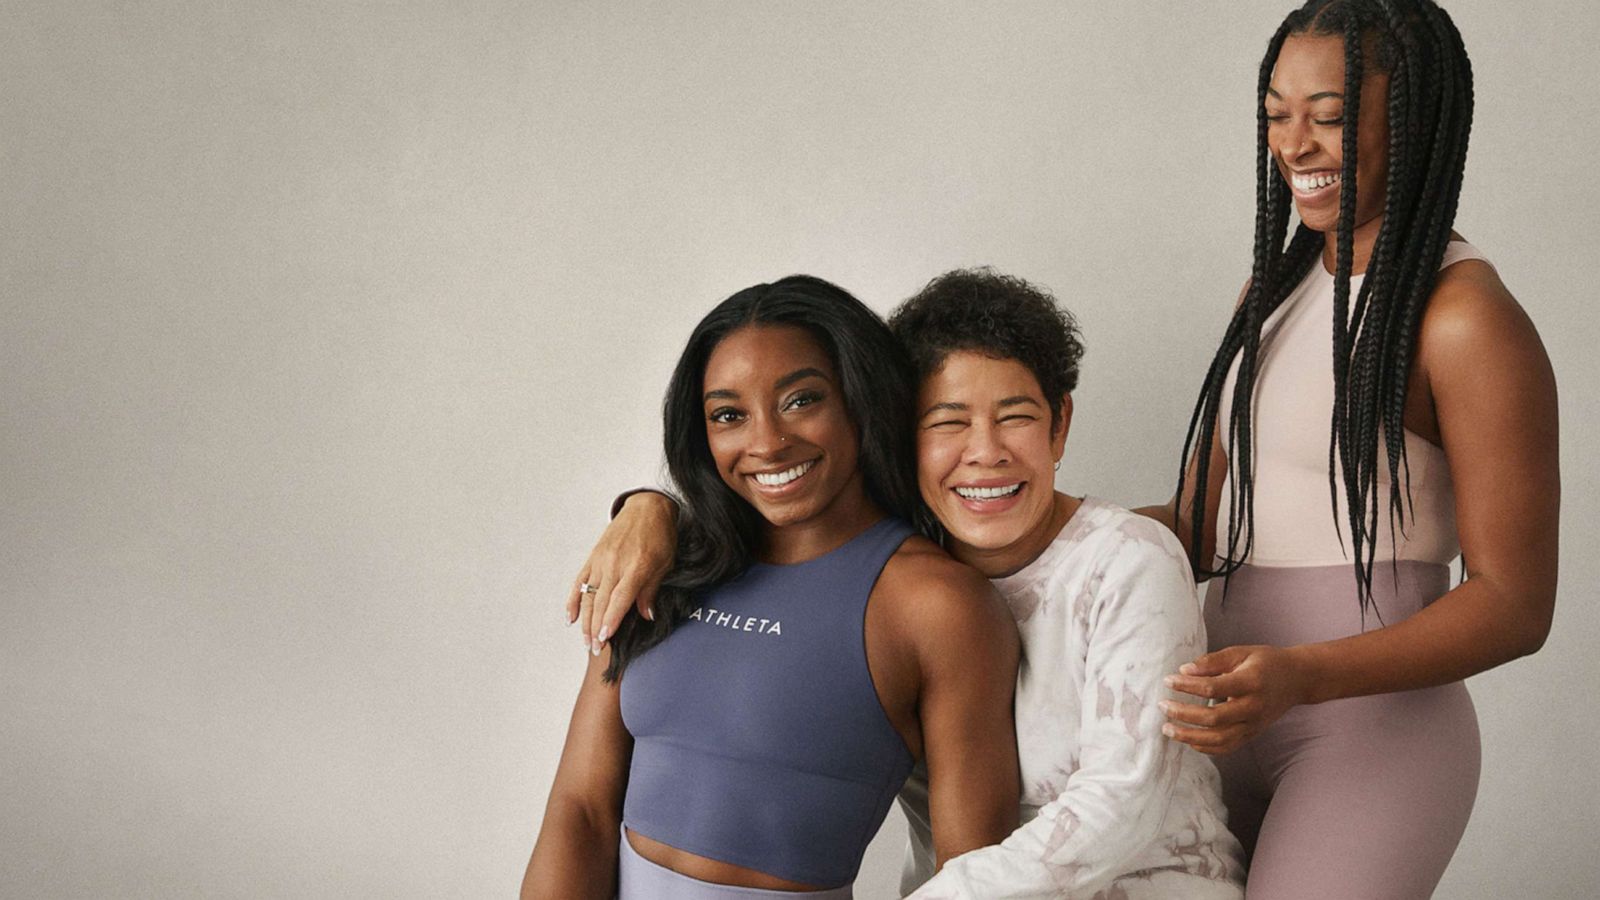 Athleta Launches The Power of She, Uniting Women and Girls Everywhere  with a Shared Pledge of Sisterhood